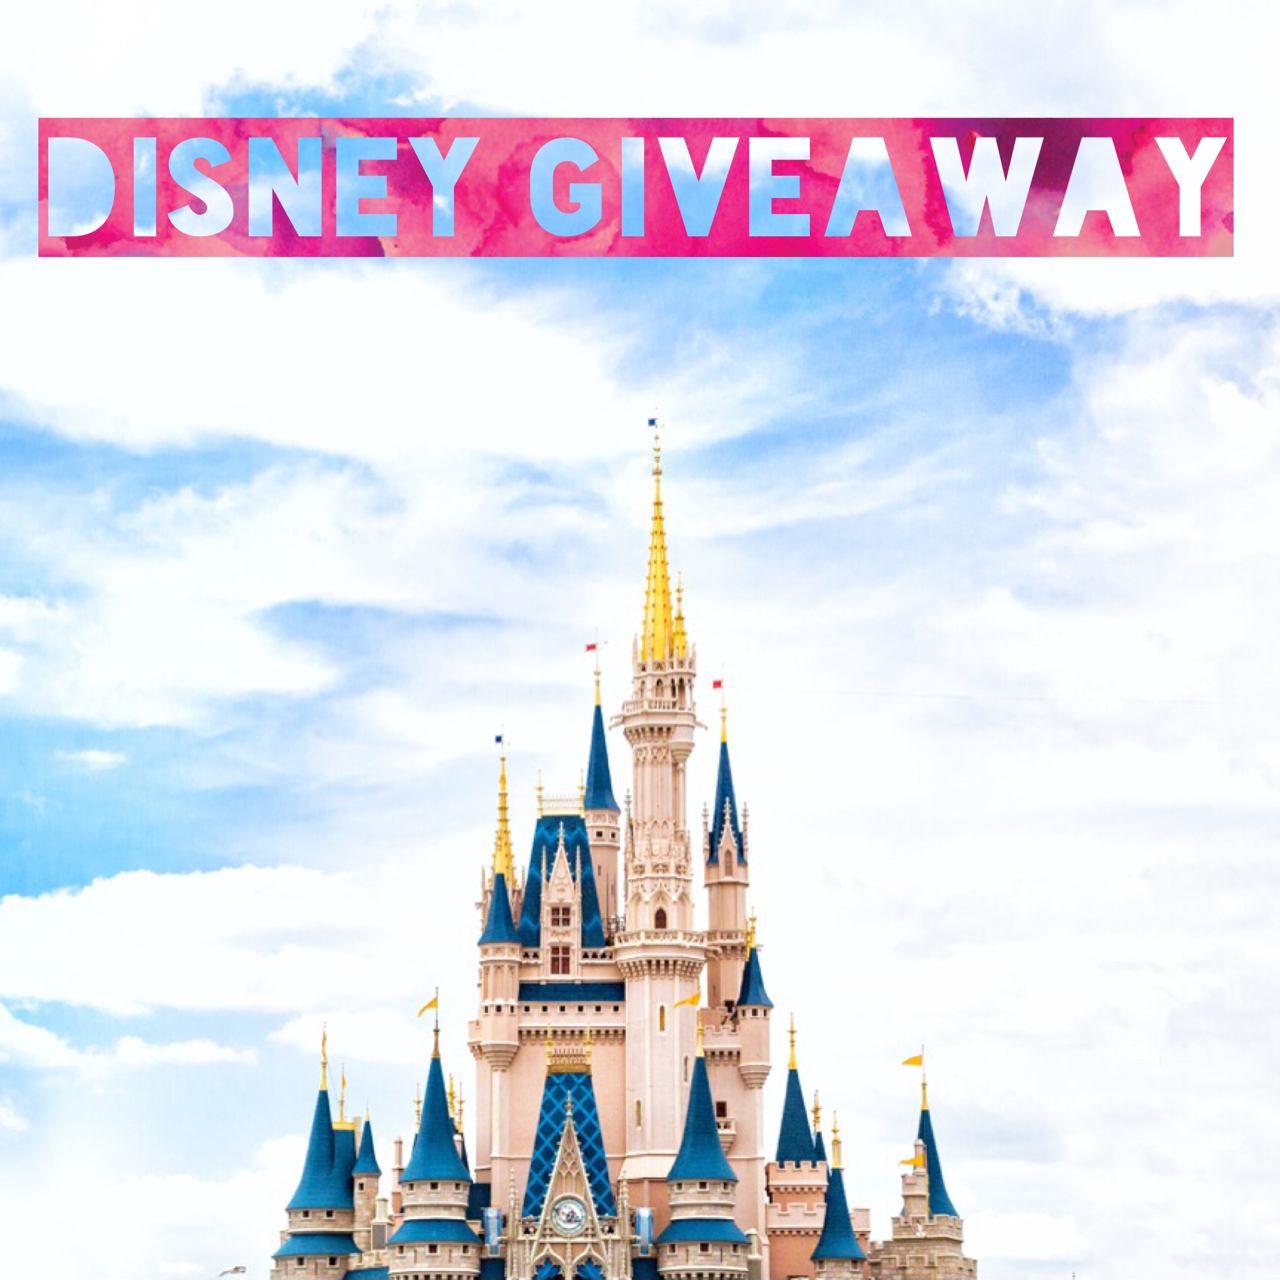 $500 Disney Gift Card Giveaway